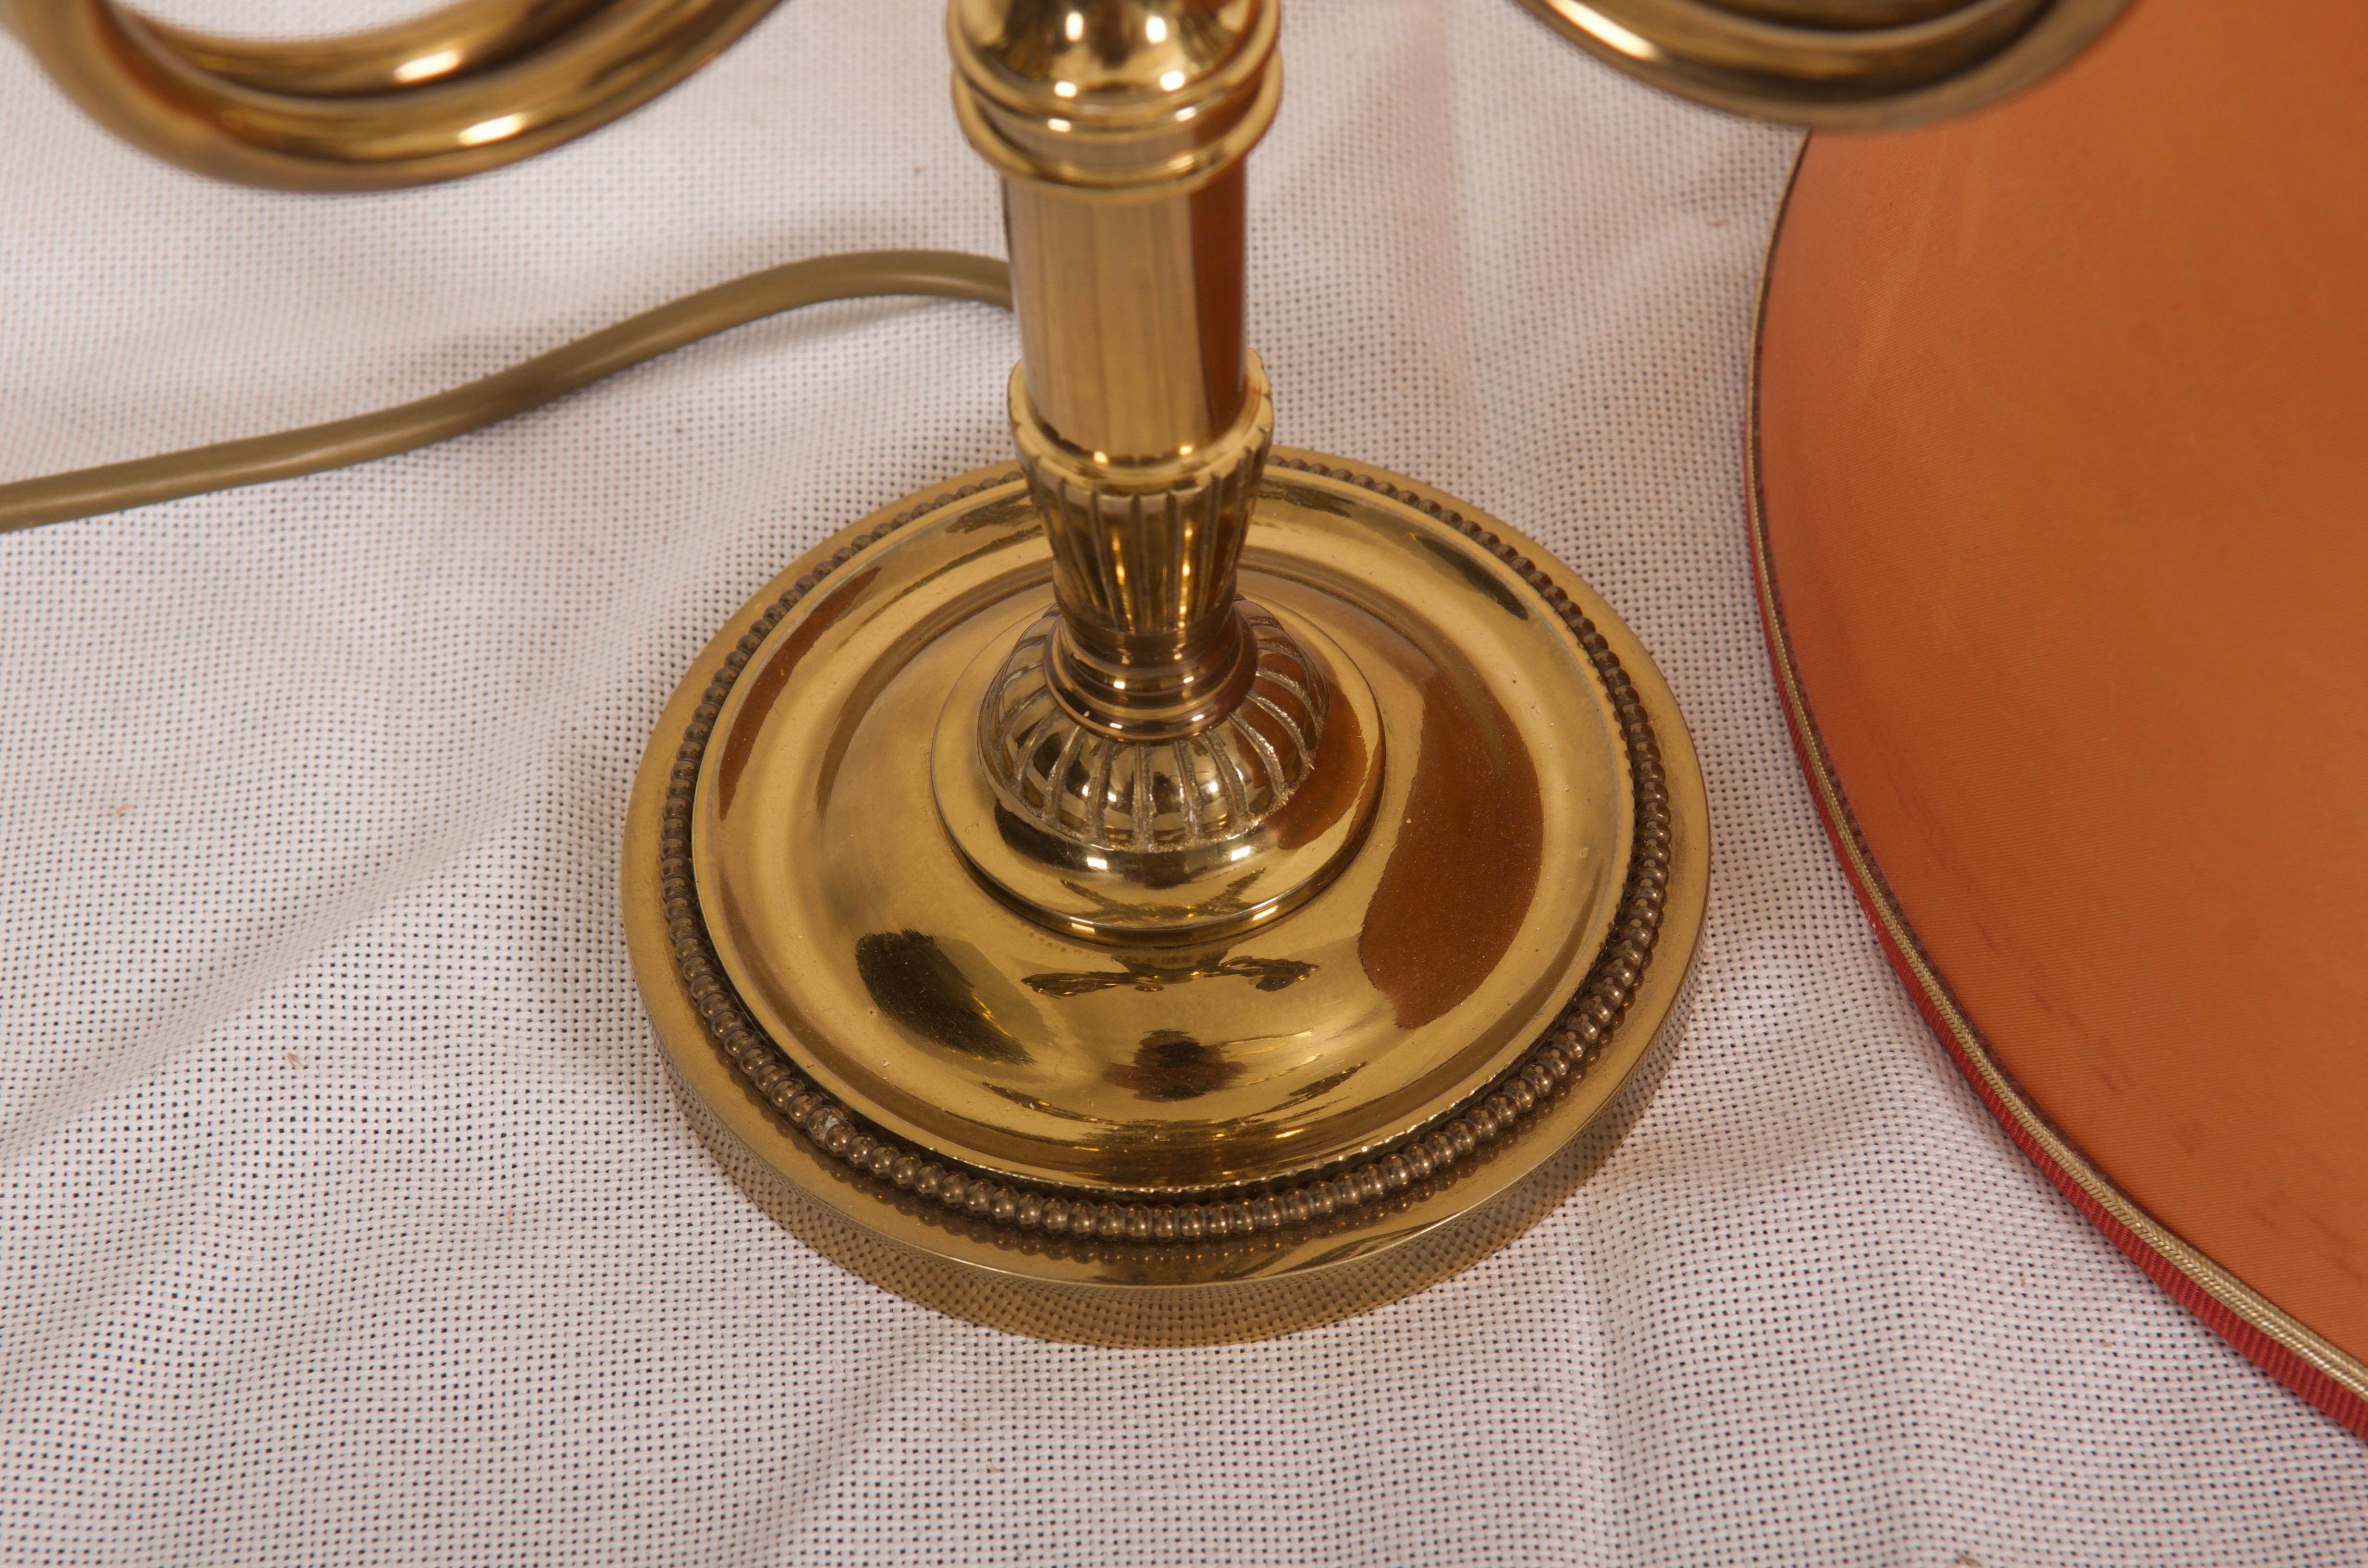 Brass base fitted with three E14 sockets Art Deco style made in England in the 1950s. 
Age and signs of use. Screens with minor damage or stains.
Vintage original condition.